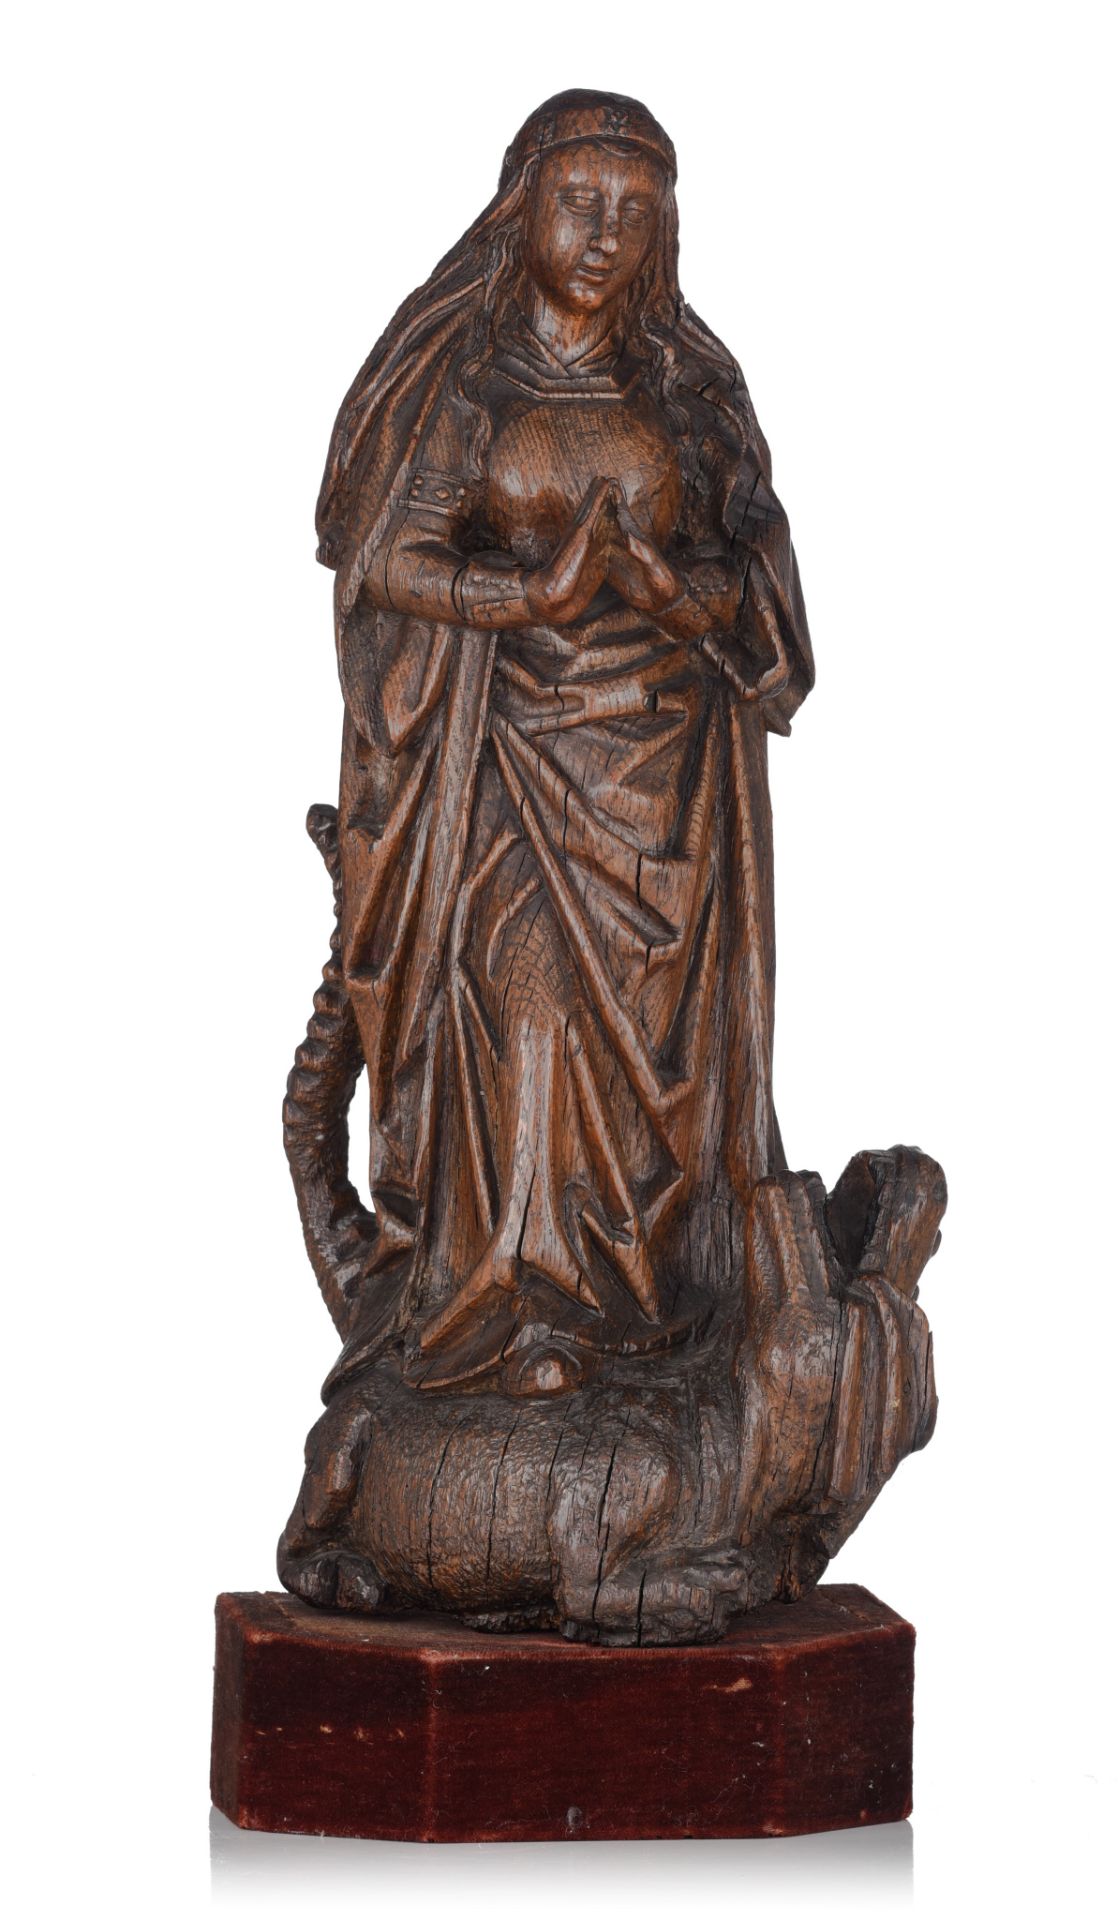 A fine oak sculpture of Saint Margaret and the dragon, 16thC, the Southern Netherlands, H 61 cm